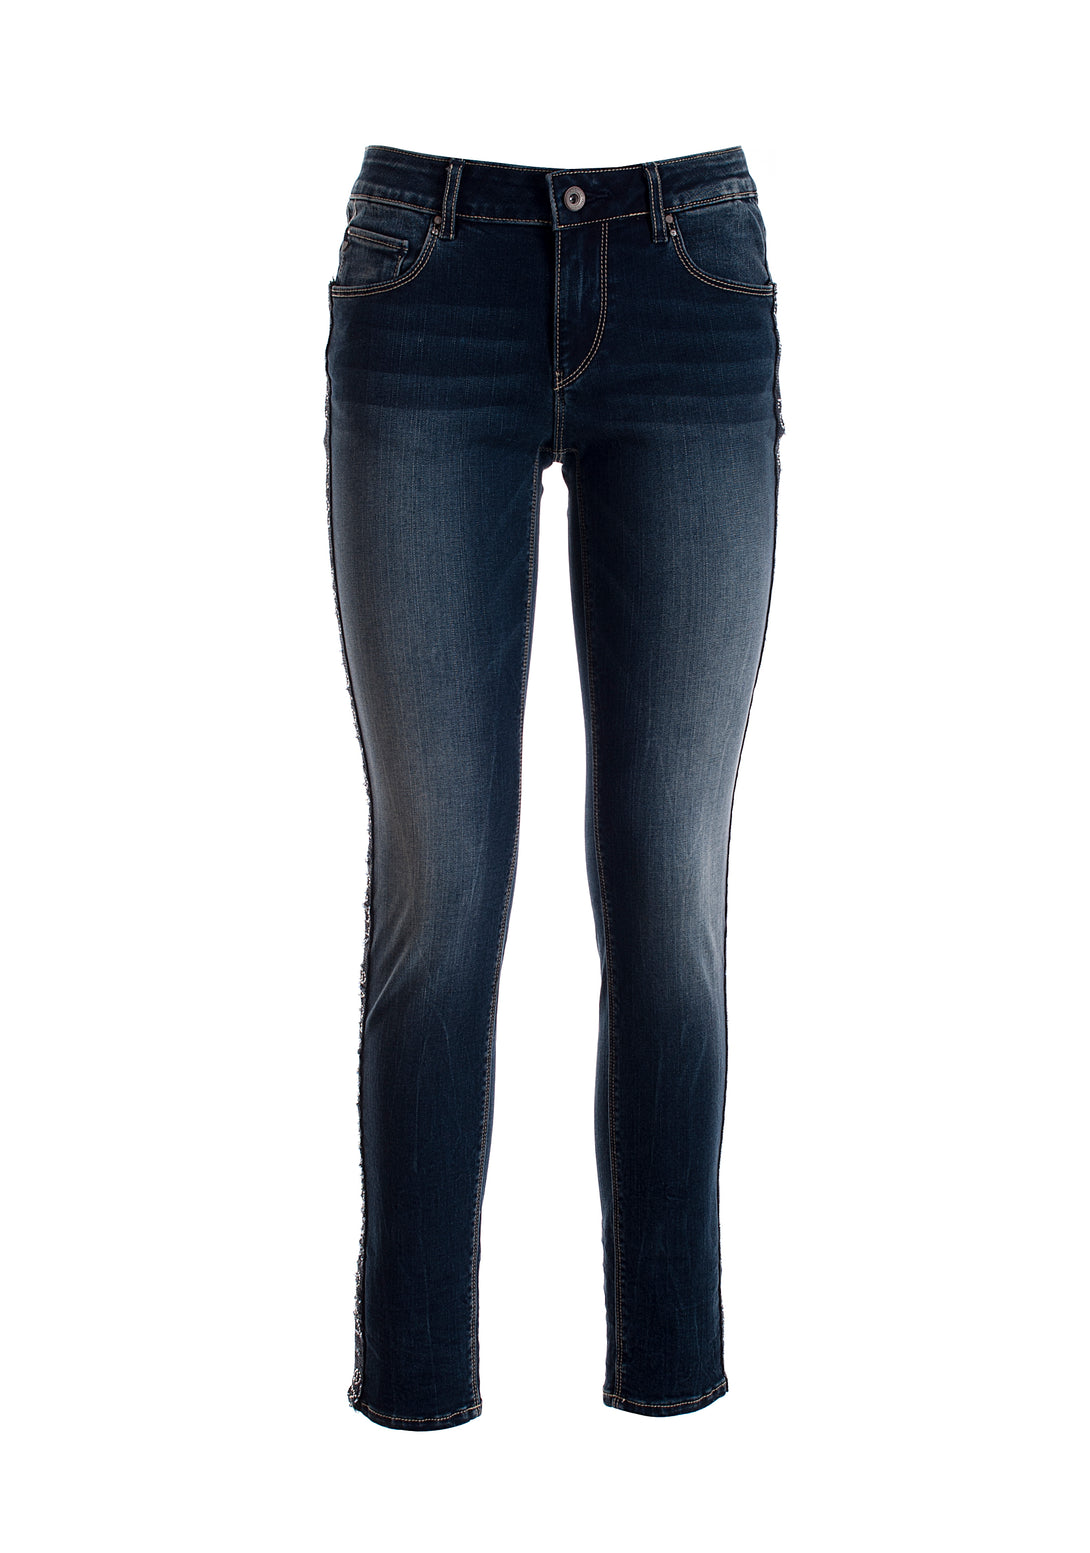 Jeans skinny fit with push-up effect. Made in stretch denim Fracomina F120W10008D00402-130